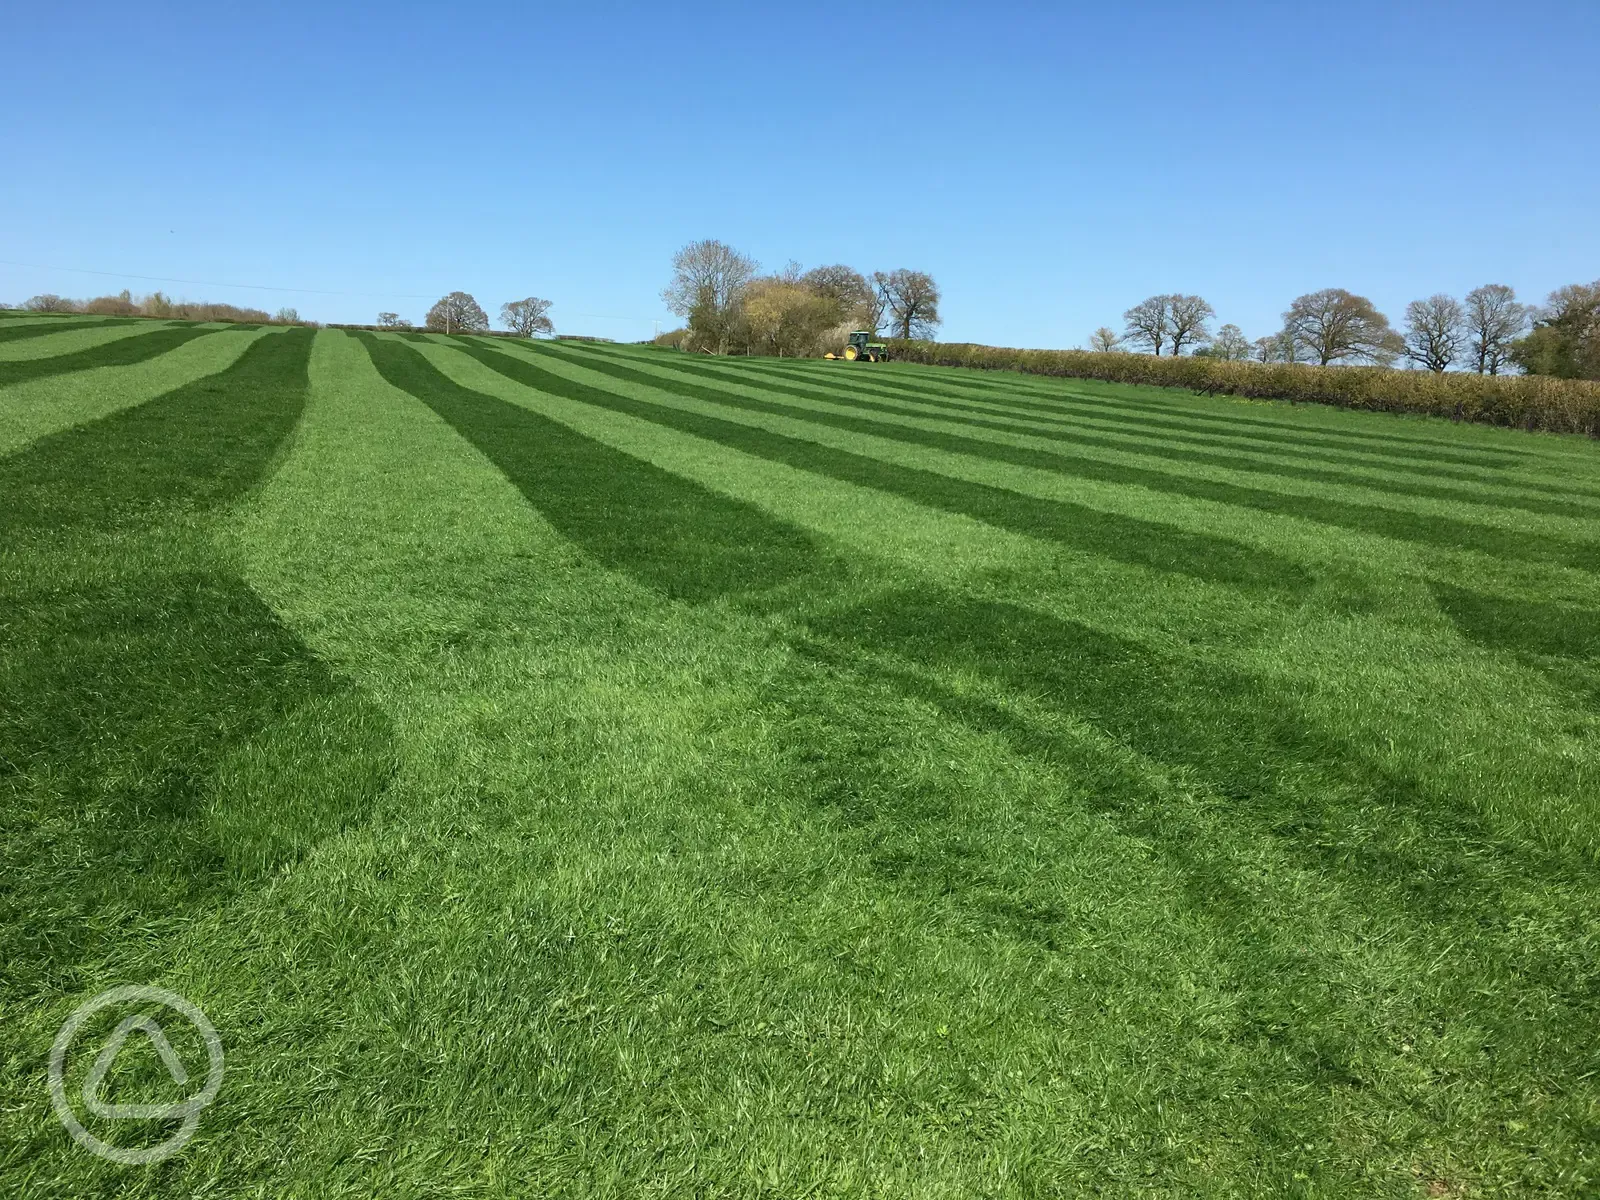 The luscious green field with stripes after being rolled